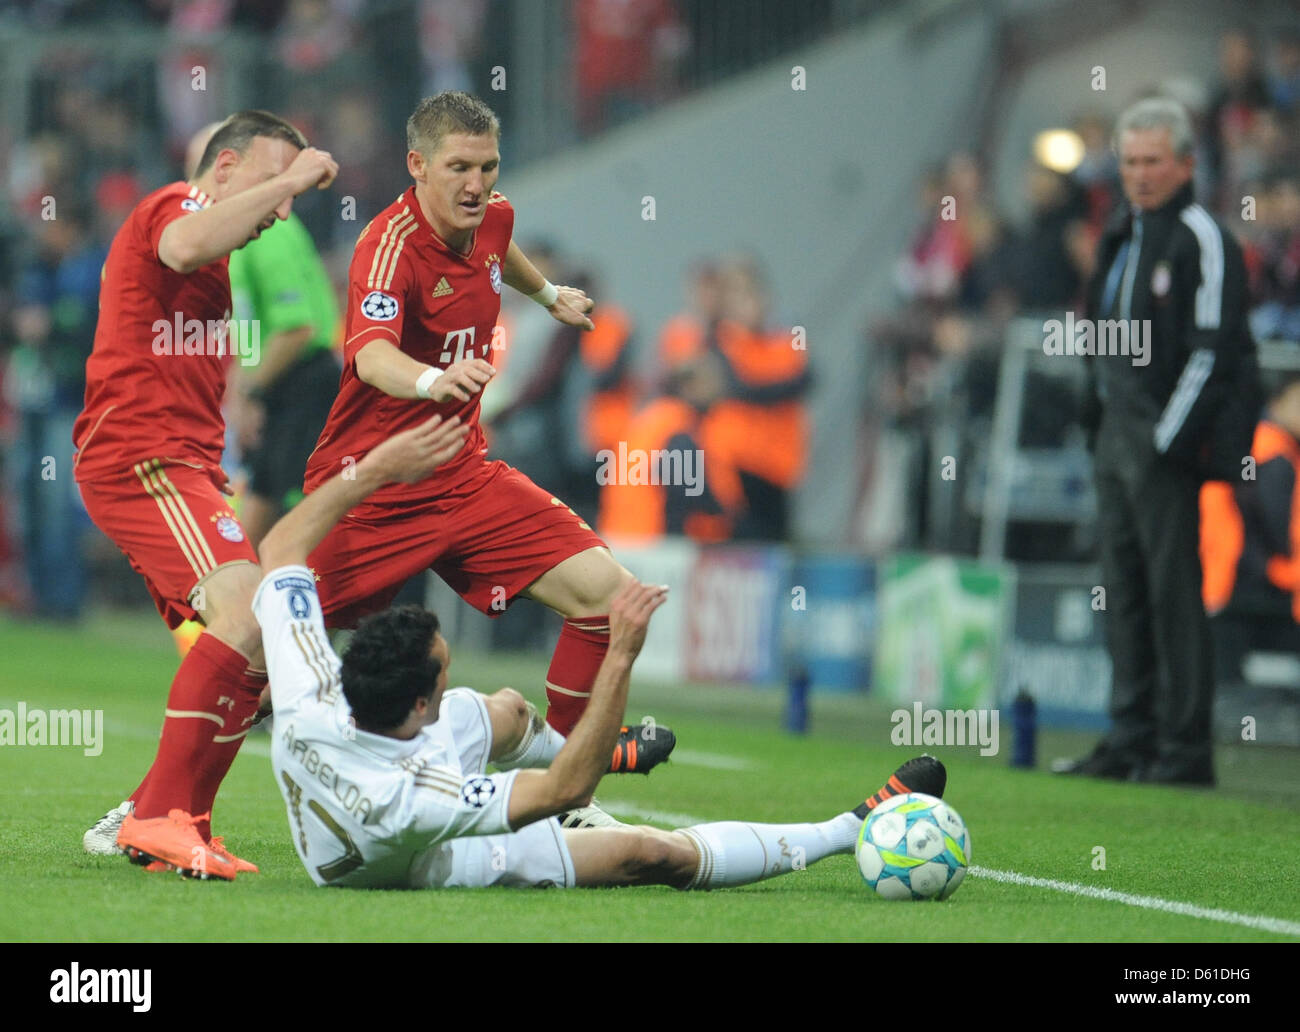 Munich's Franck Ribery (L) and Bastian Schweinsteiger (C) and Madrid's Alvaro Arbeloa vie for the ball during the Champions League semi-final first leg soccer match between FC Bayern Munich and Real Madrid at the Allianz Arena in Munich, Germany, 17 April 2012. Photo: Andreas Gebert dpa/lby Stock Photo